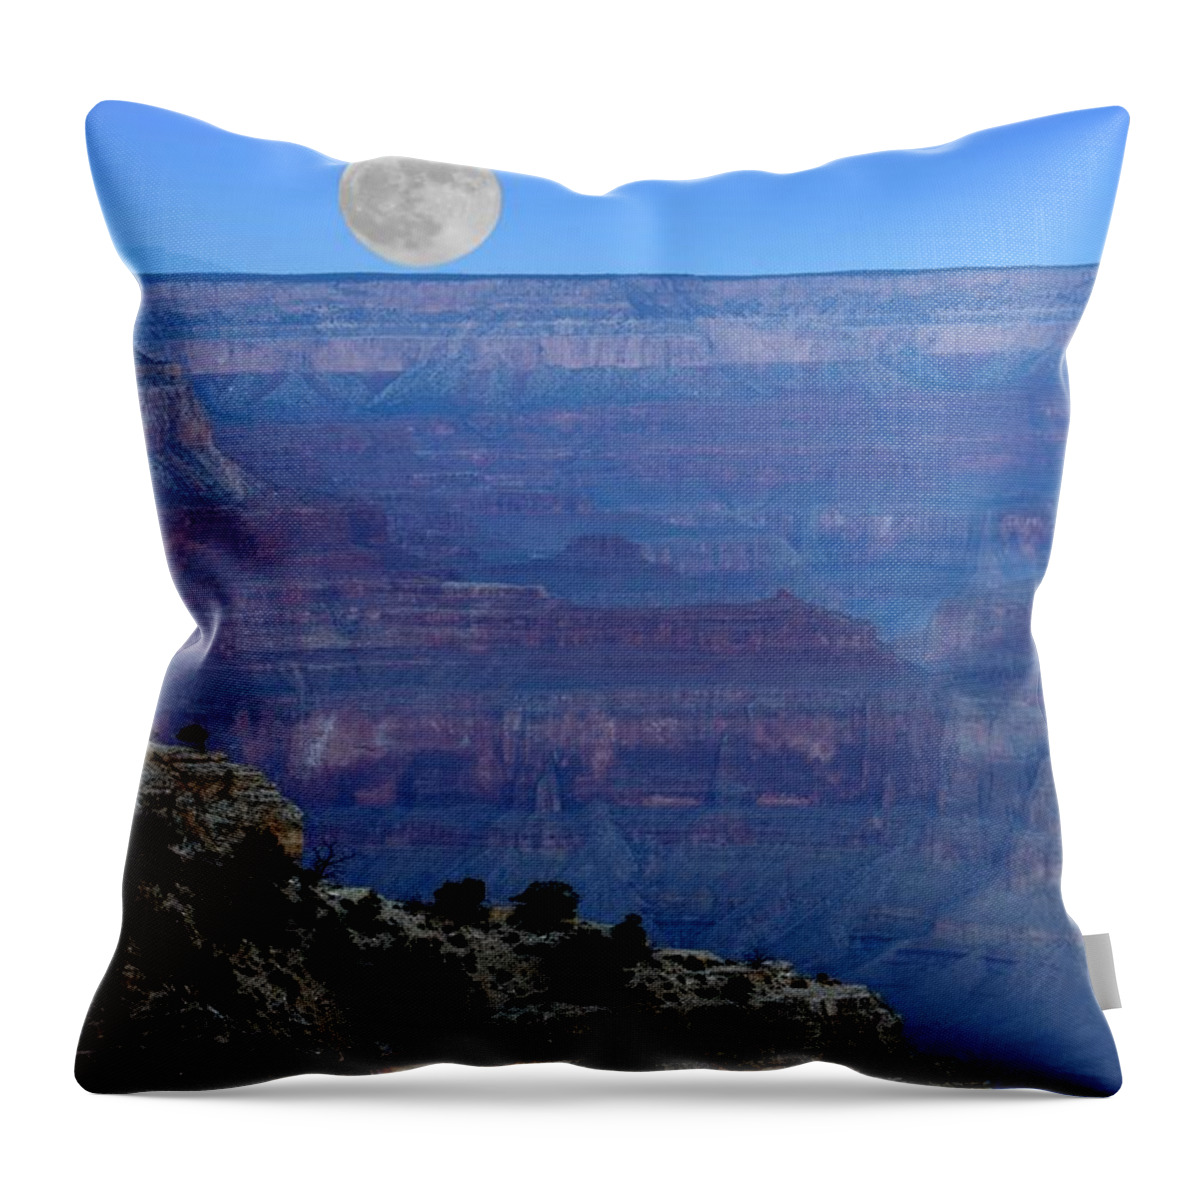 Good Night Moon Throw Pillow featuring the photograph Good Night Moon by Patrick Witz